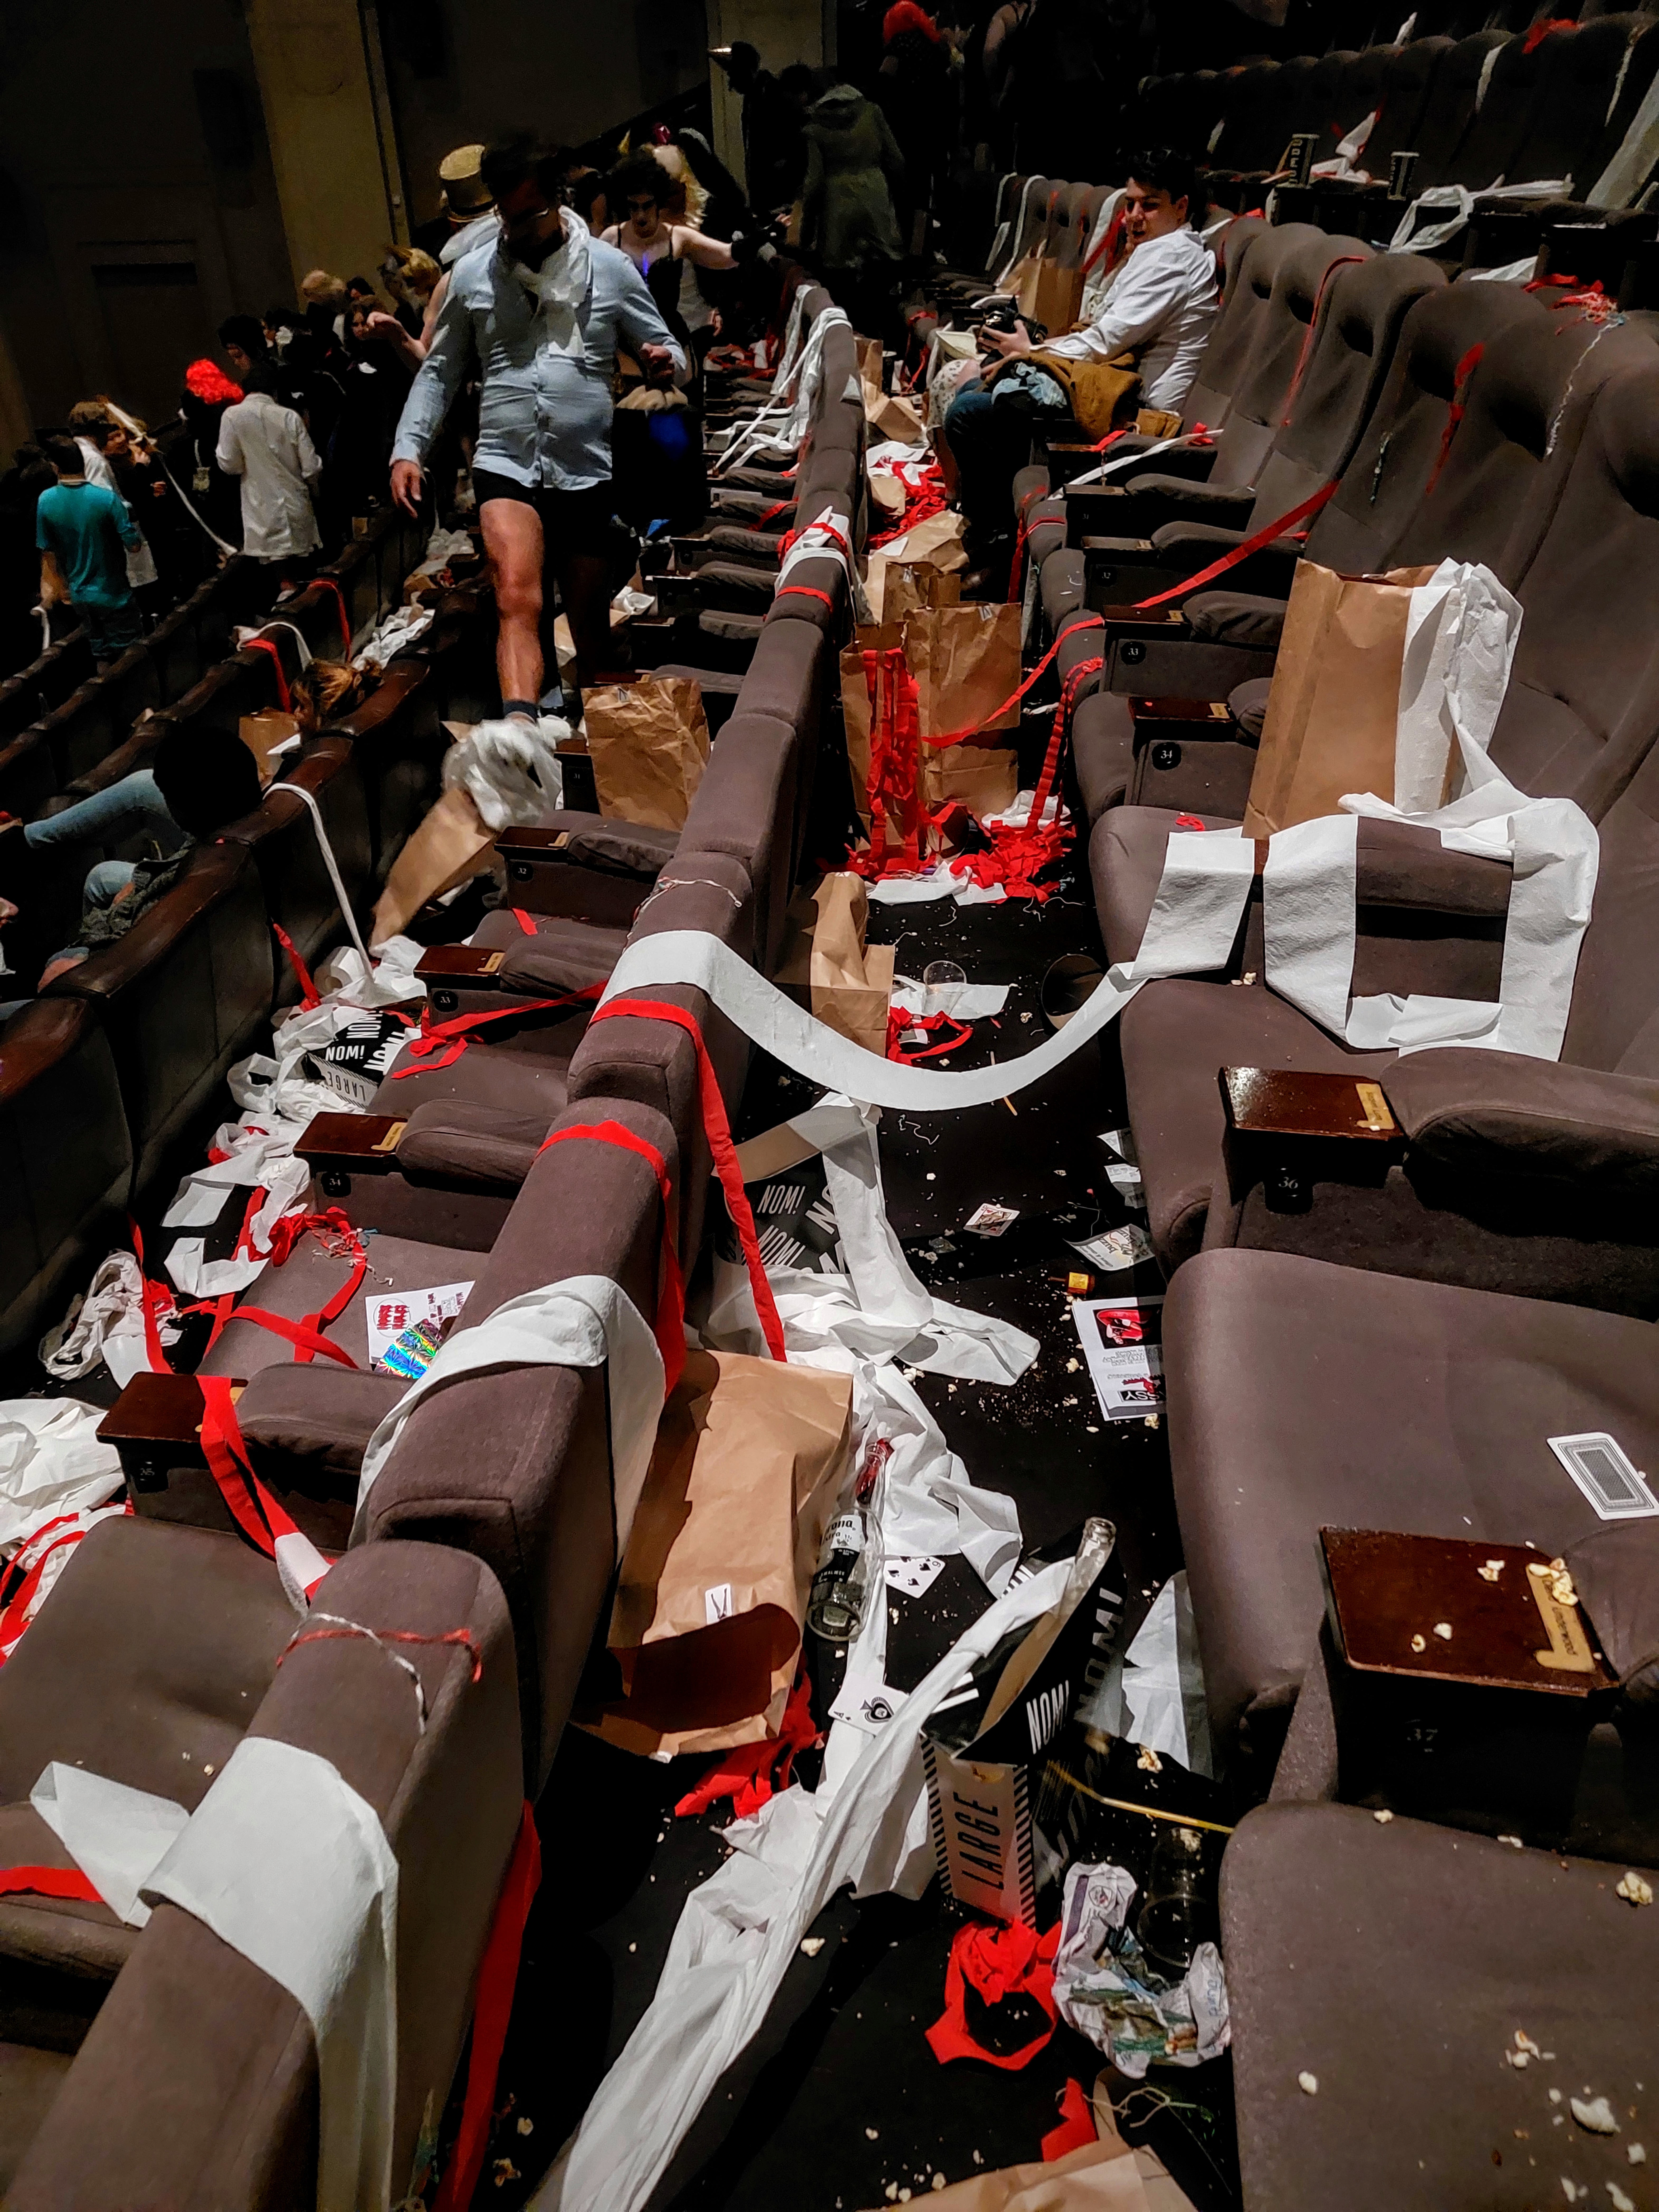 Cinema rows of seats covered in thrown toilet paper.tolls and other Rocky Horror audience interaction goodies. Some people in costume are leaving in the background. Fun!